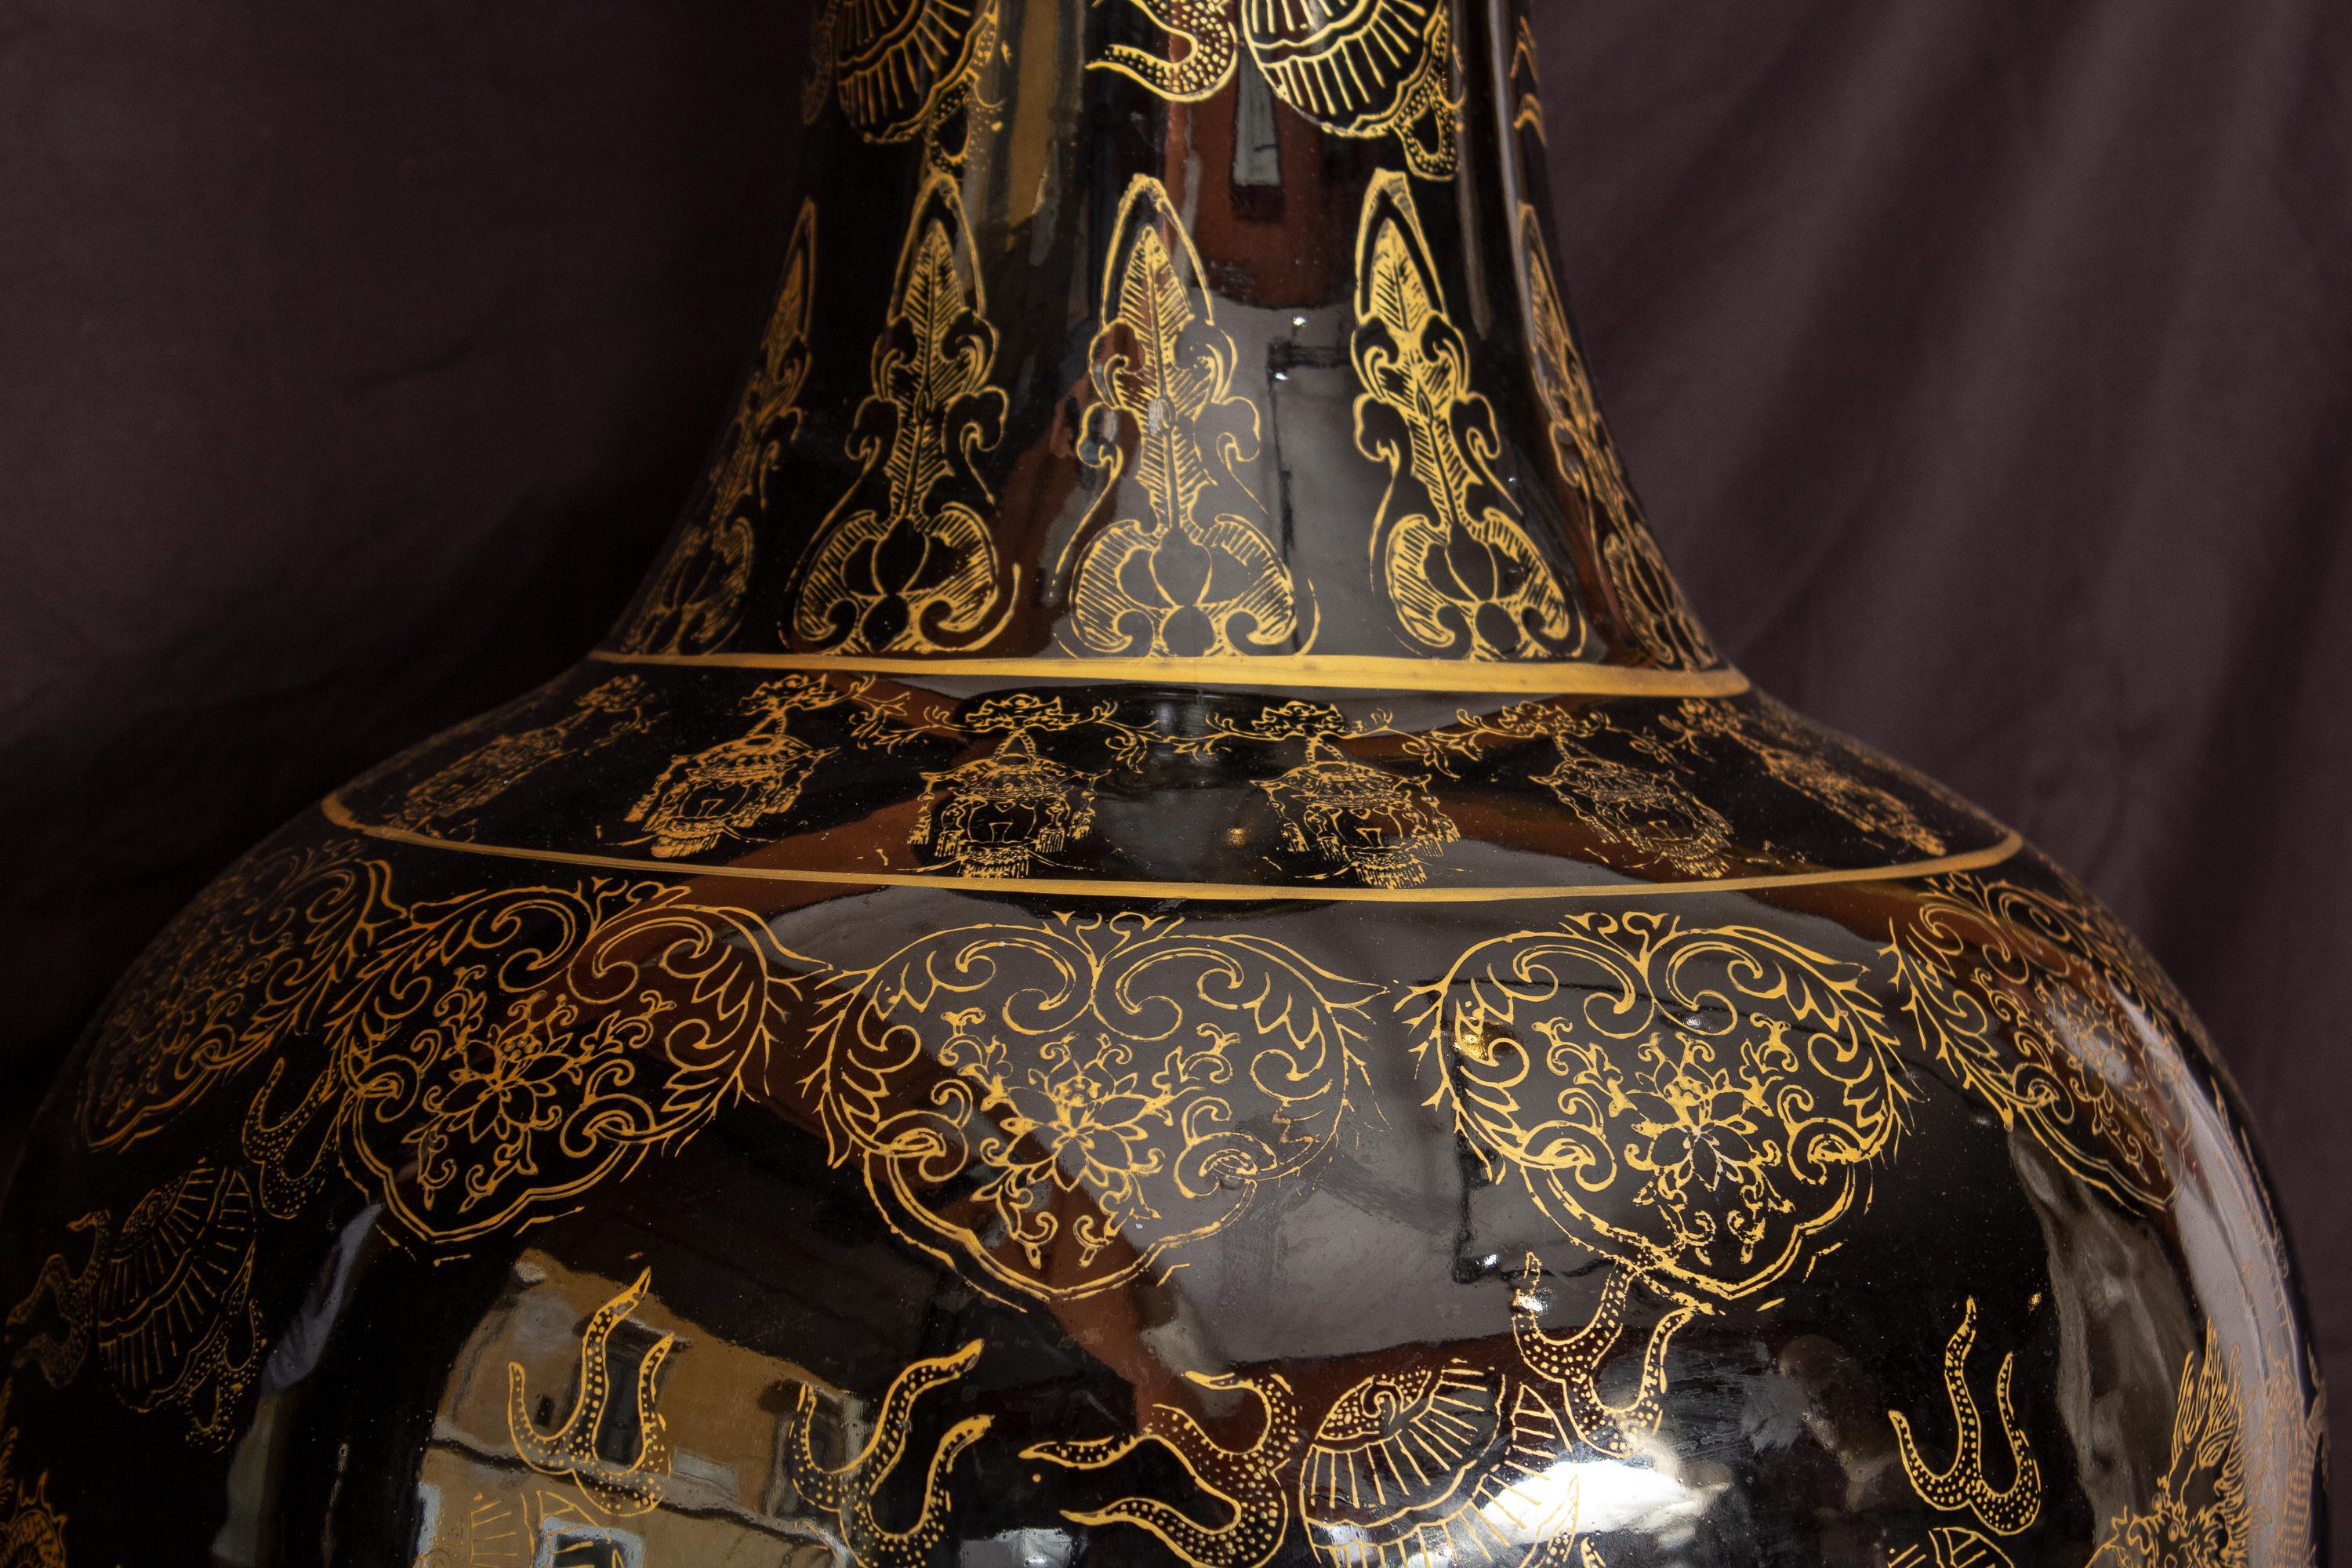 Pair of Large Chinese Porcelain Black and Gilt-Decorated Vases 18